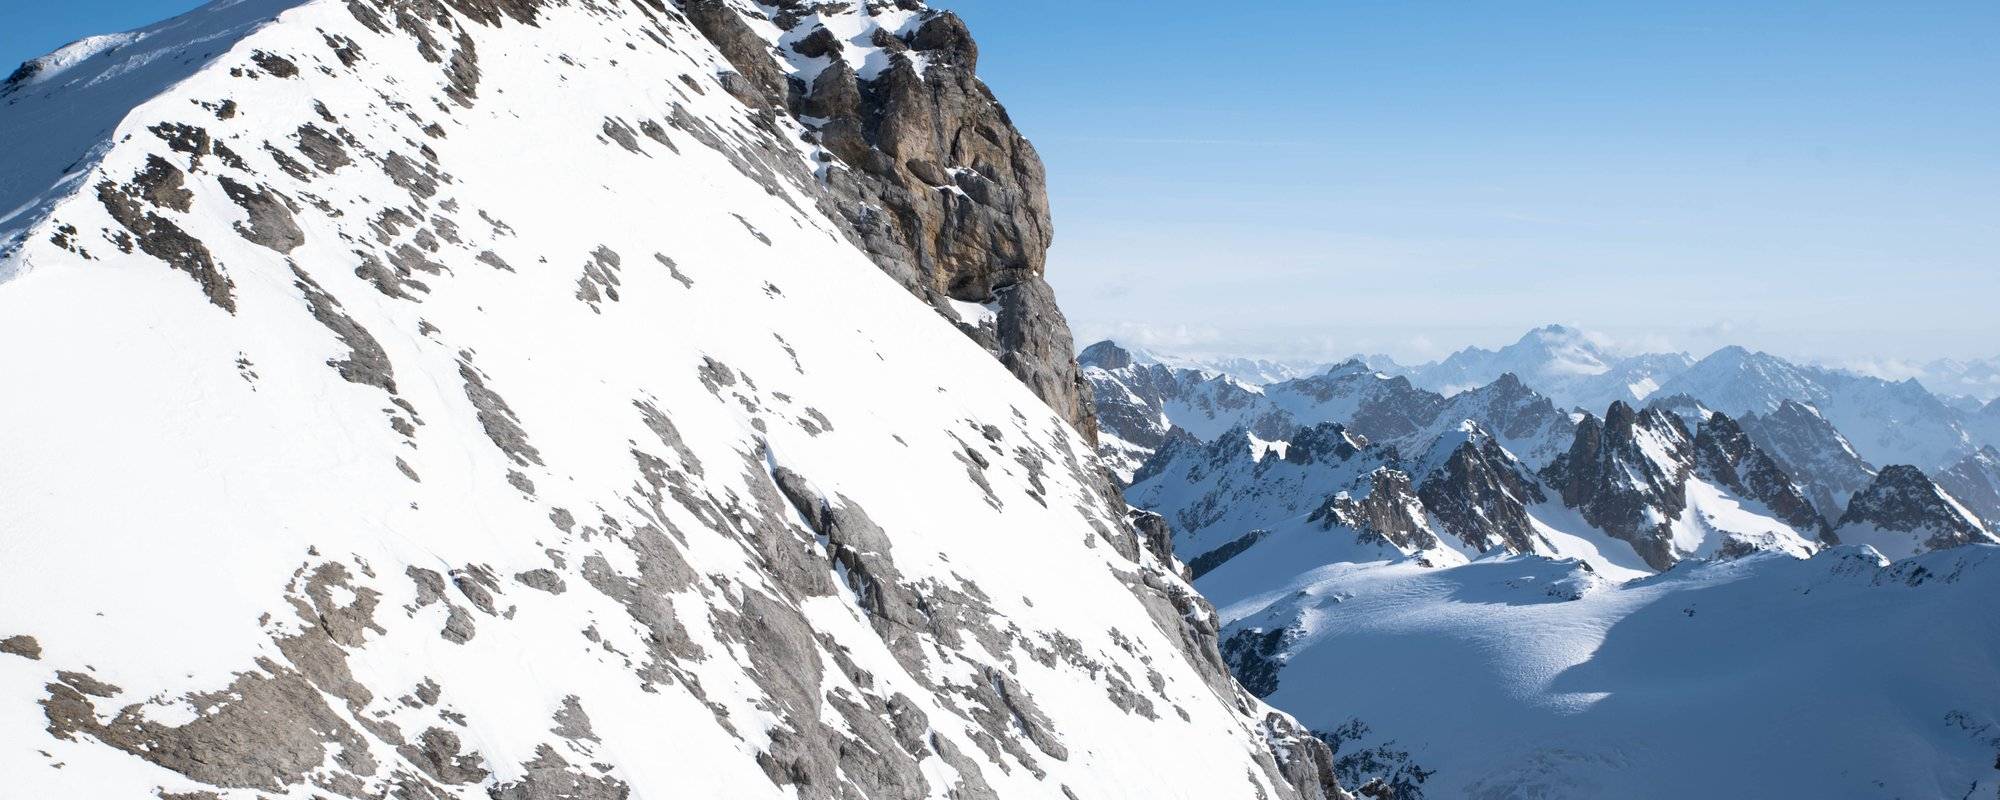 Mount Titlis - a jewel in the Swiss Alps